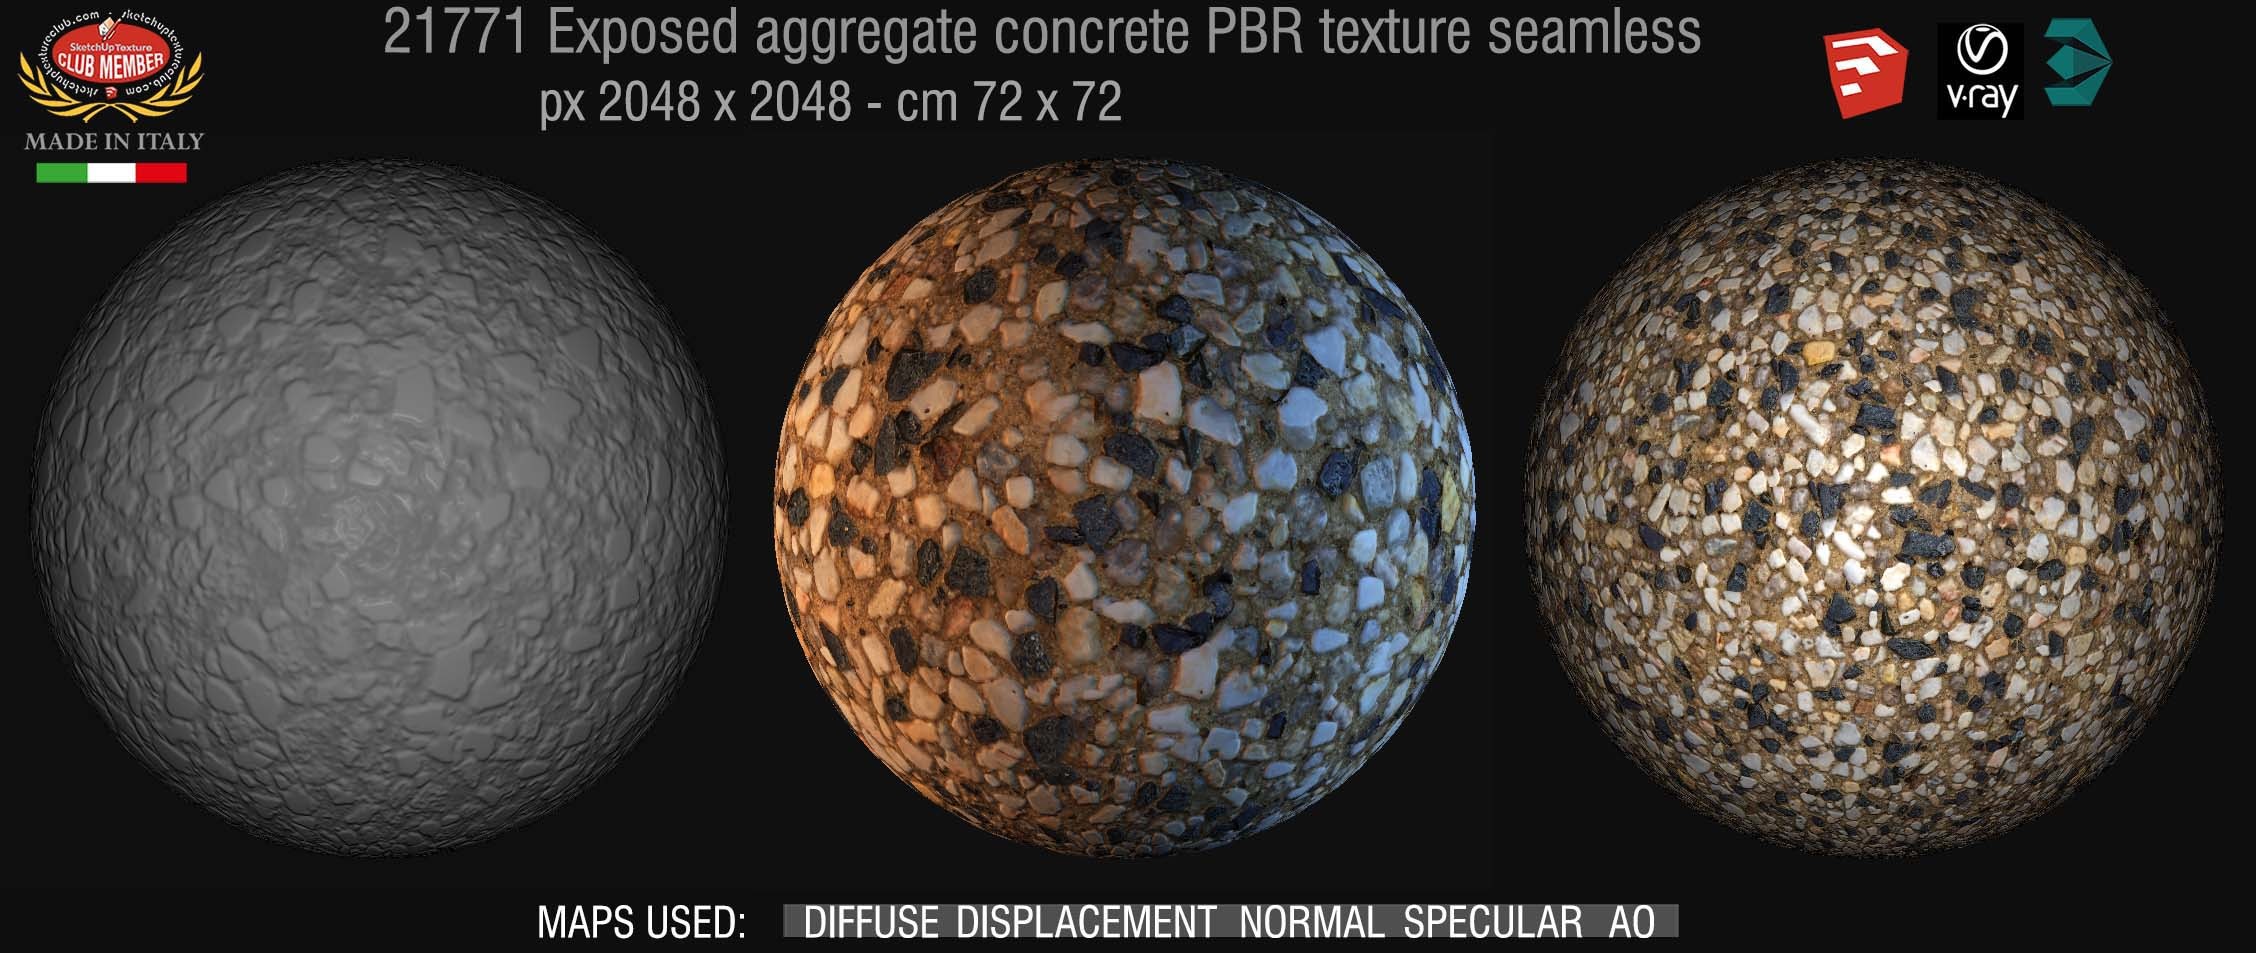 21771 Exposed aggregate concrete PBR texture seamless DEMO